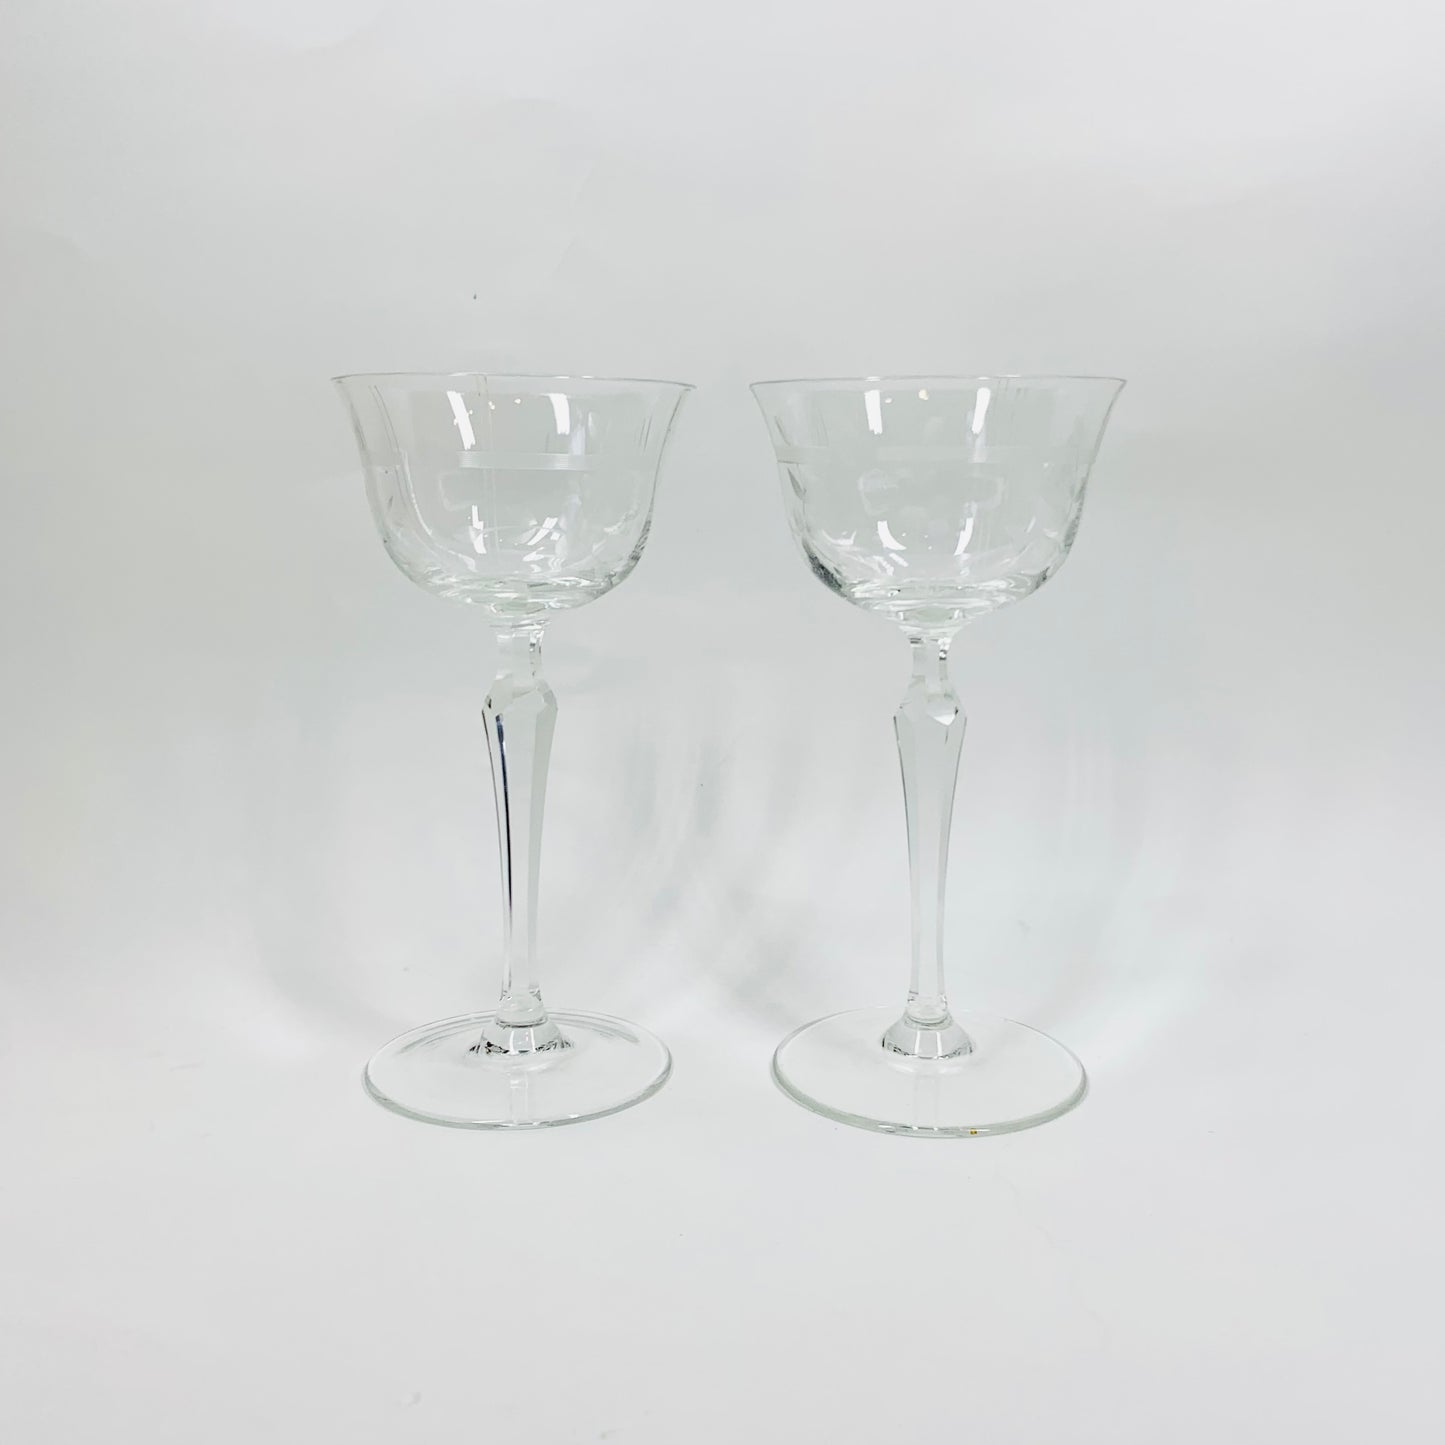 1940s hand made hand etched long stem cocktail glasses